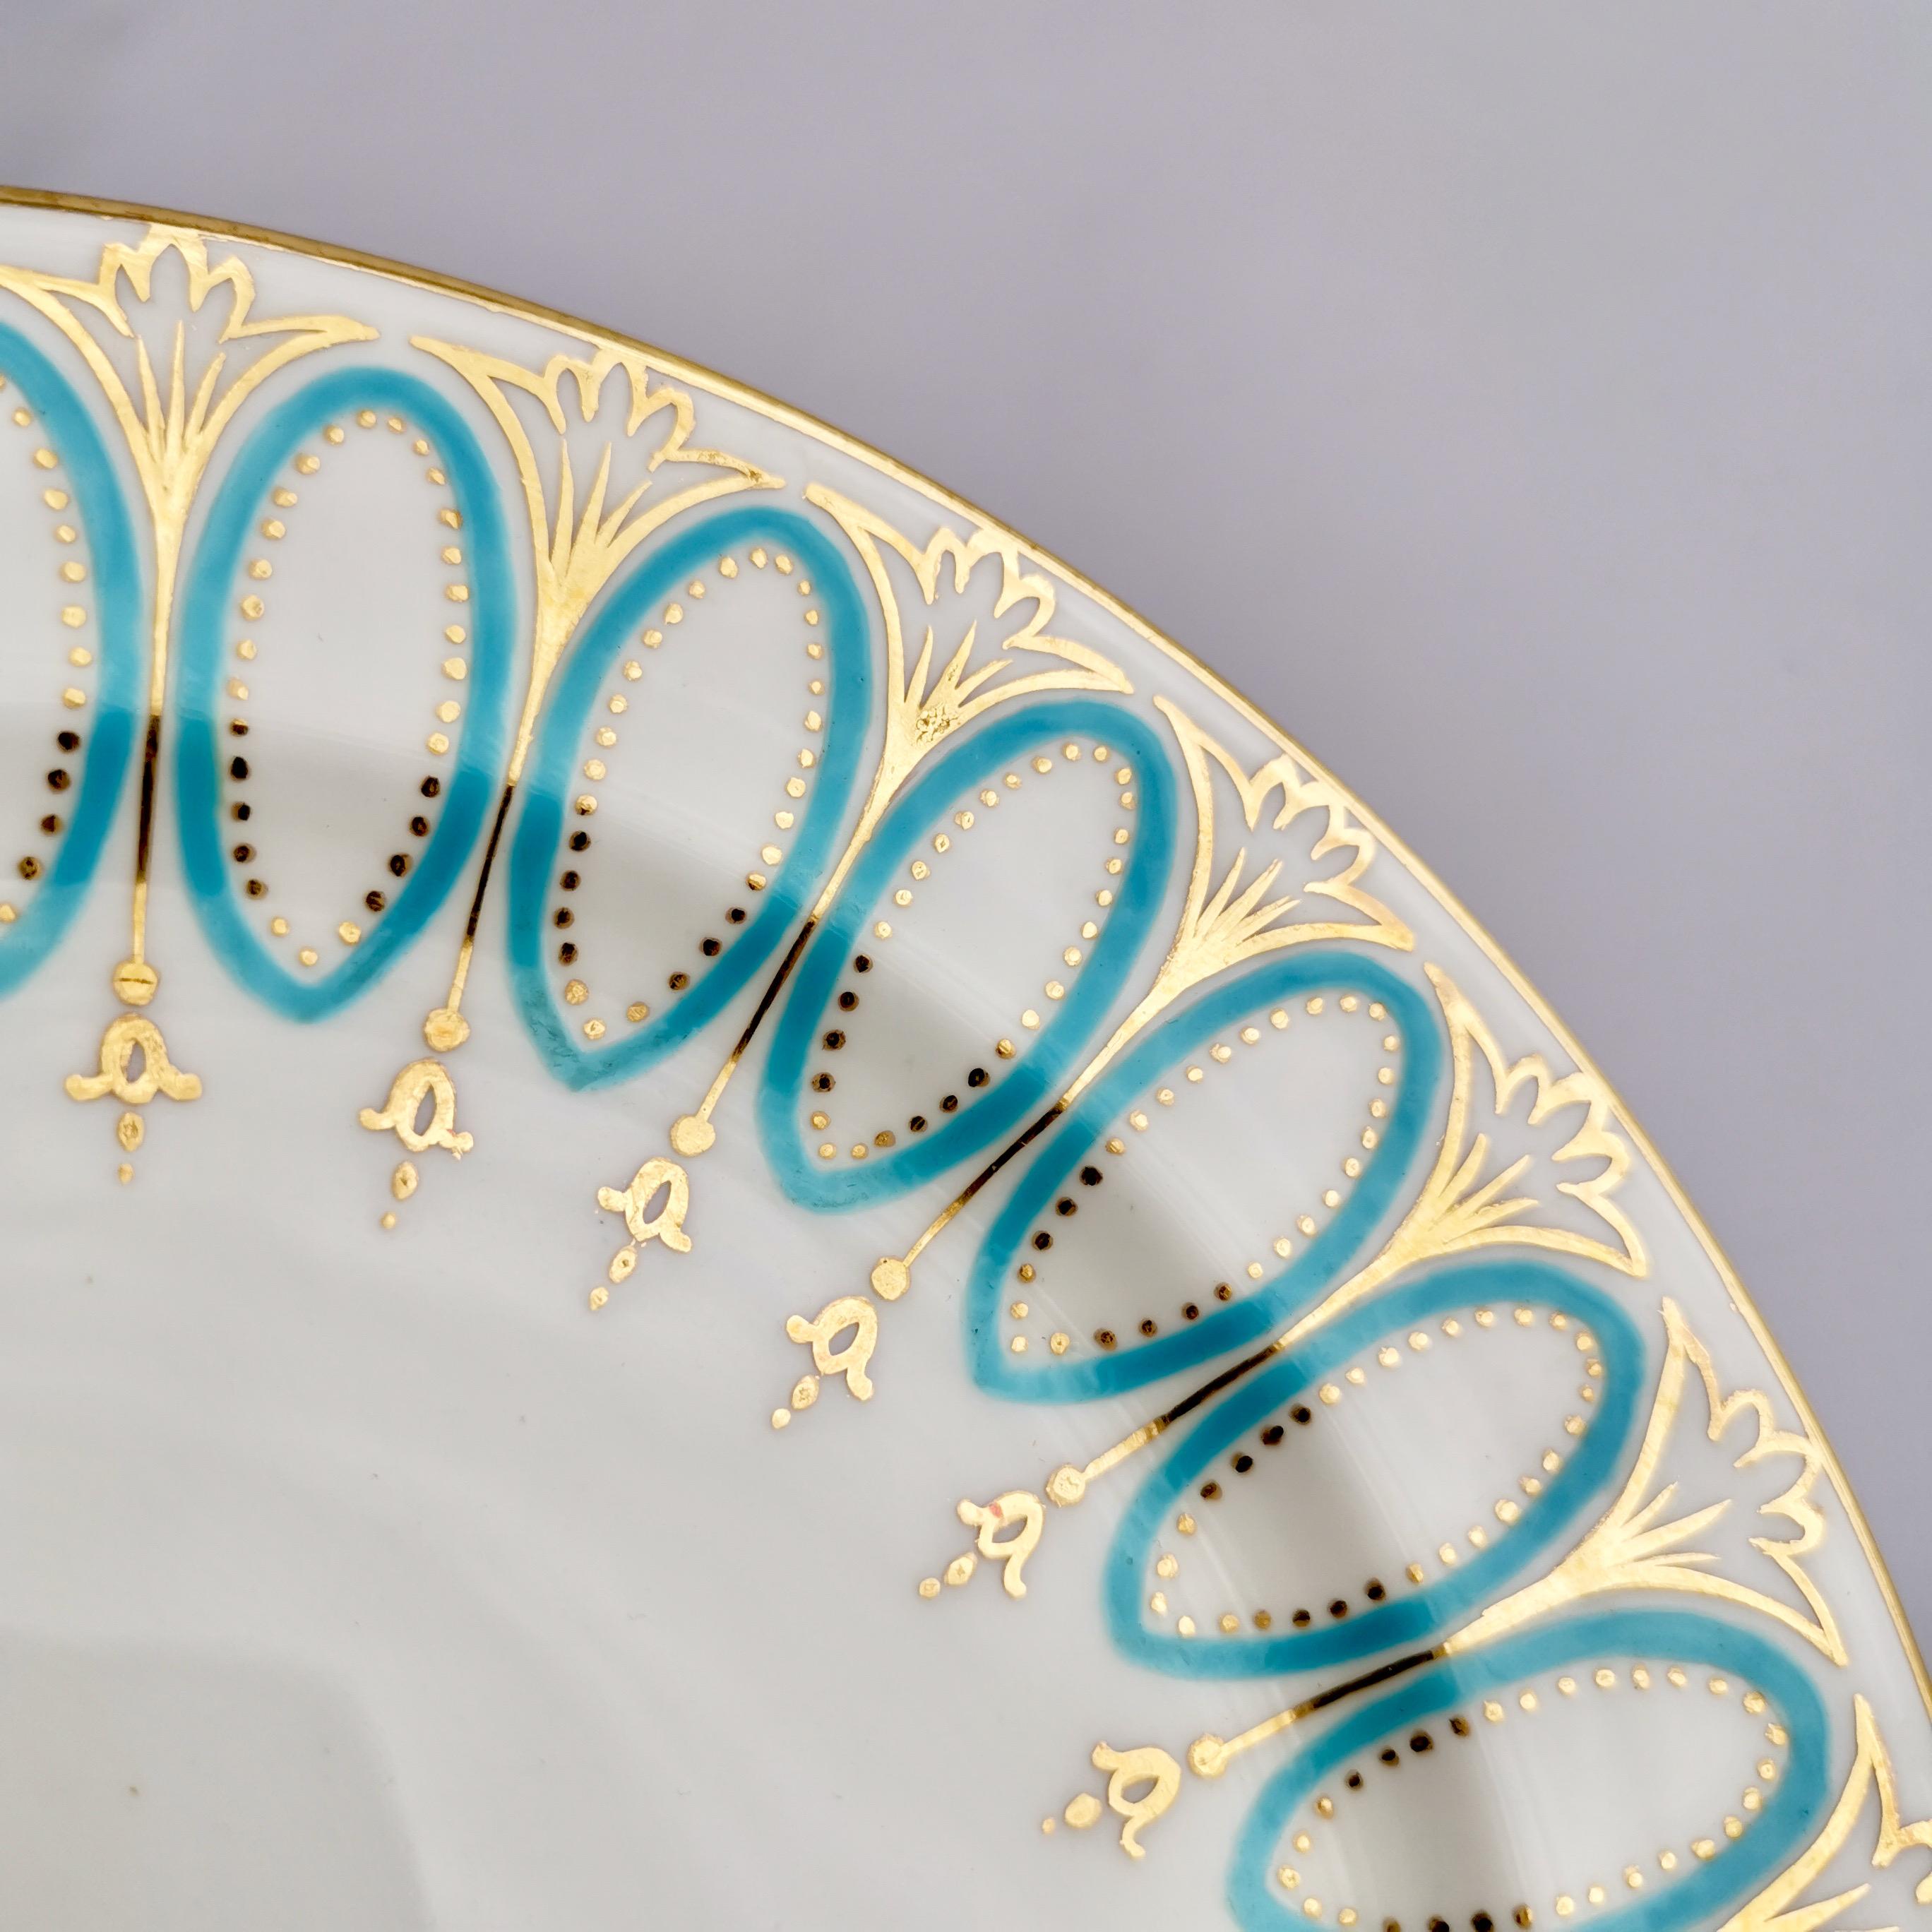 20th Century Pair of Hammersley Tea Plates, White, Gilt and Turquoise, Edwardian Early 20th C